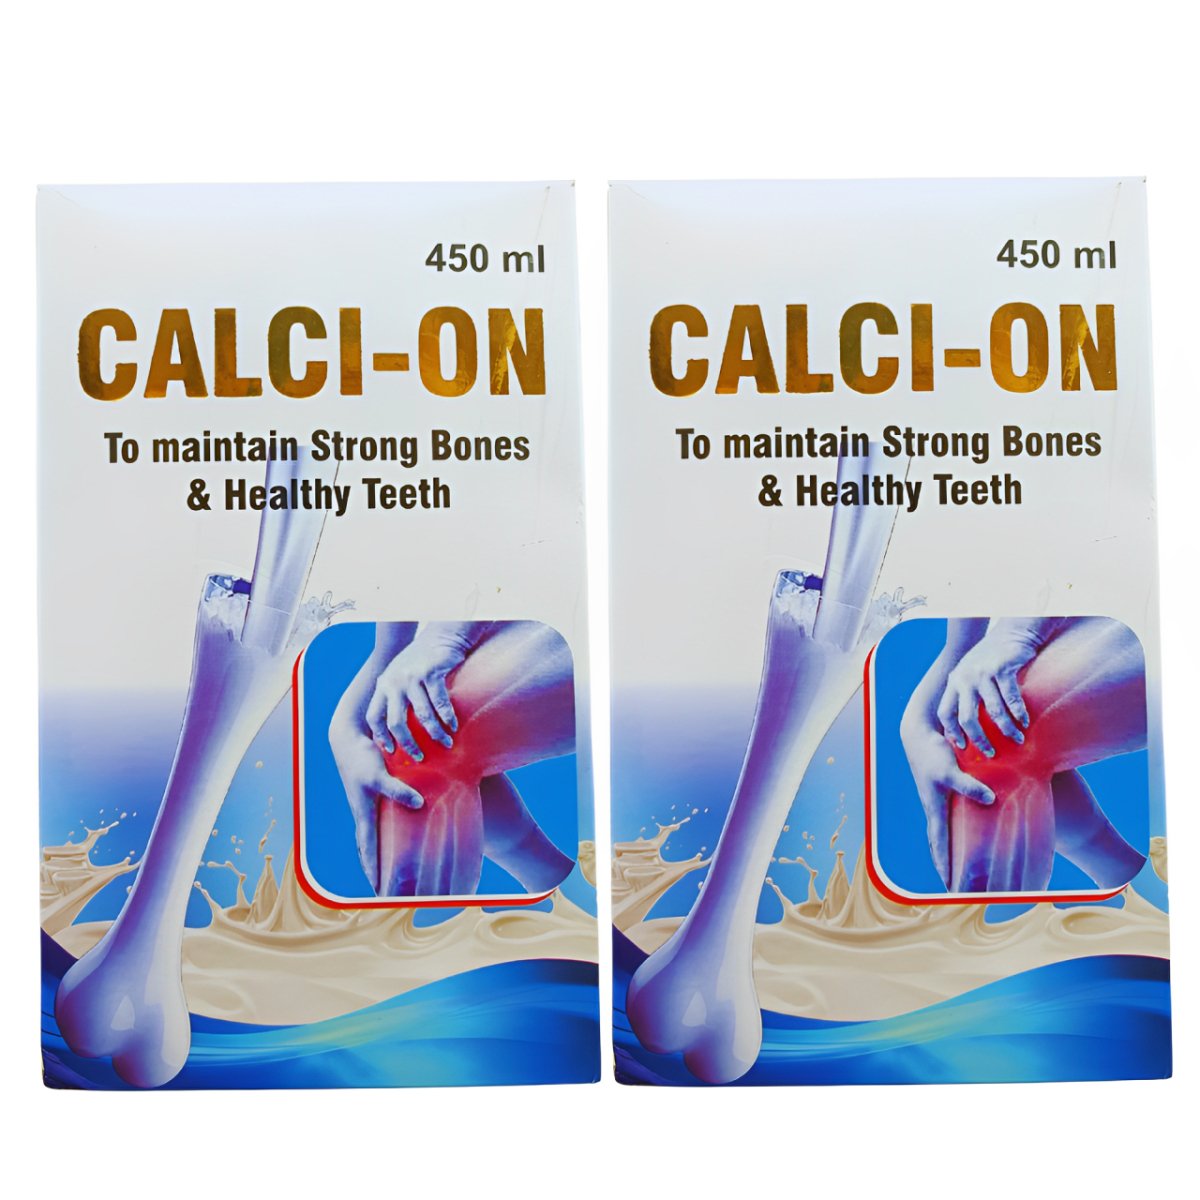 Ayurvedic CALCI-ON Syrup for Calcium